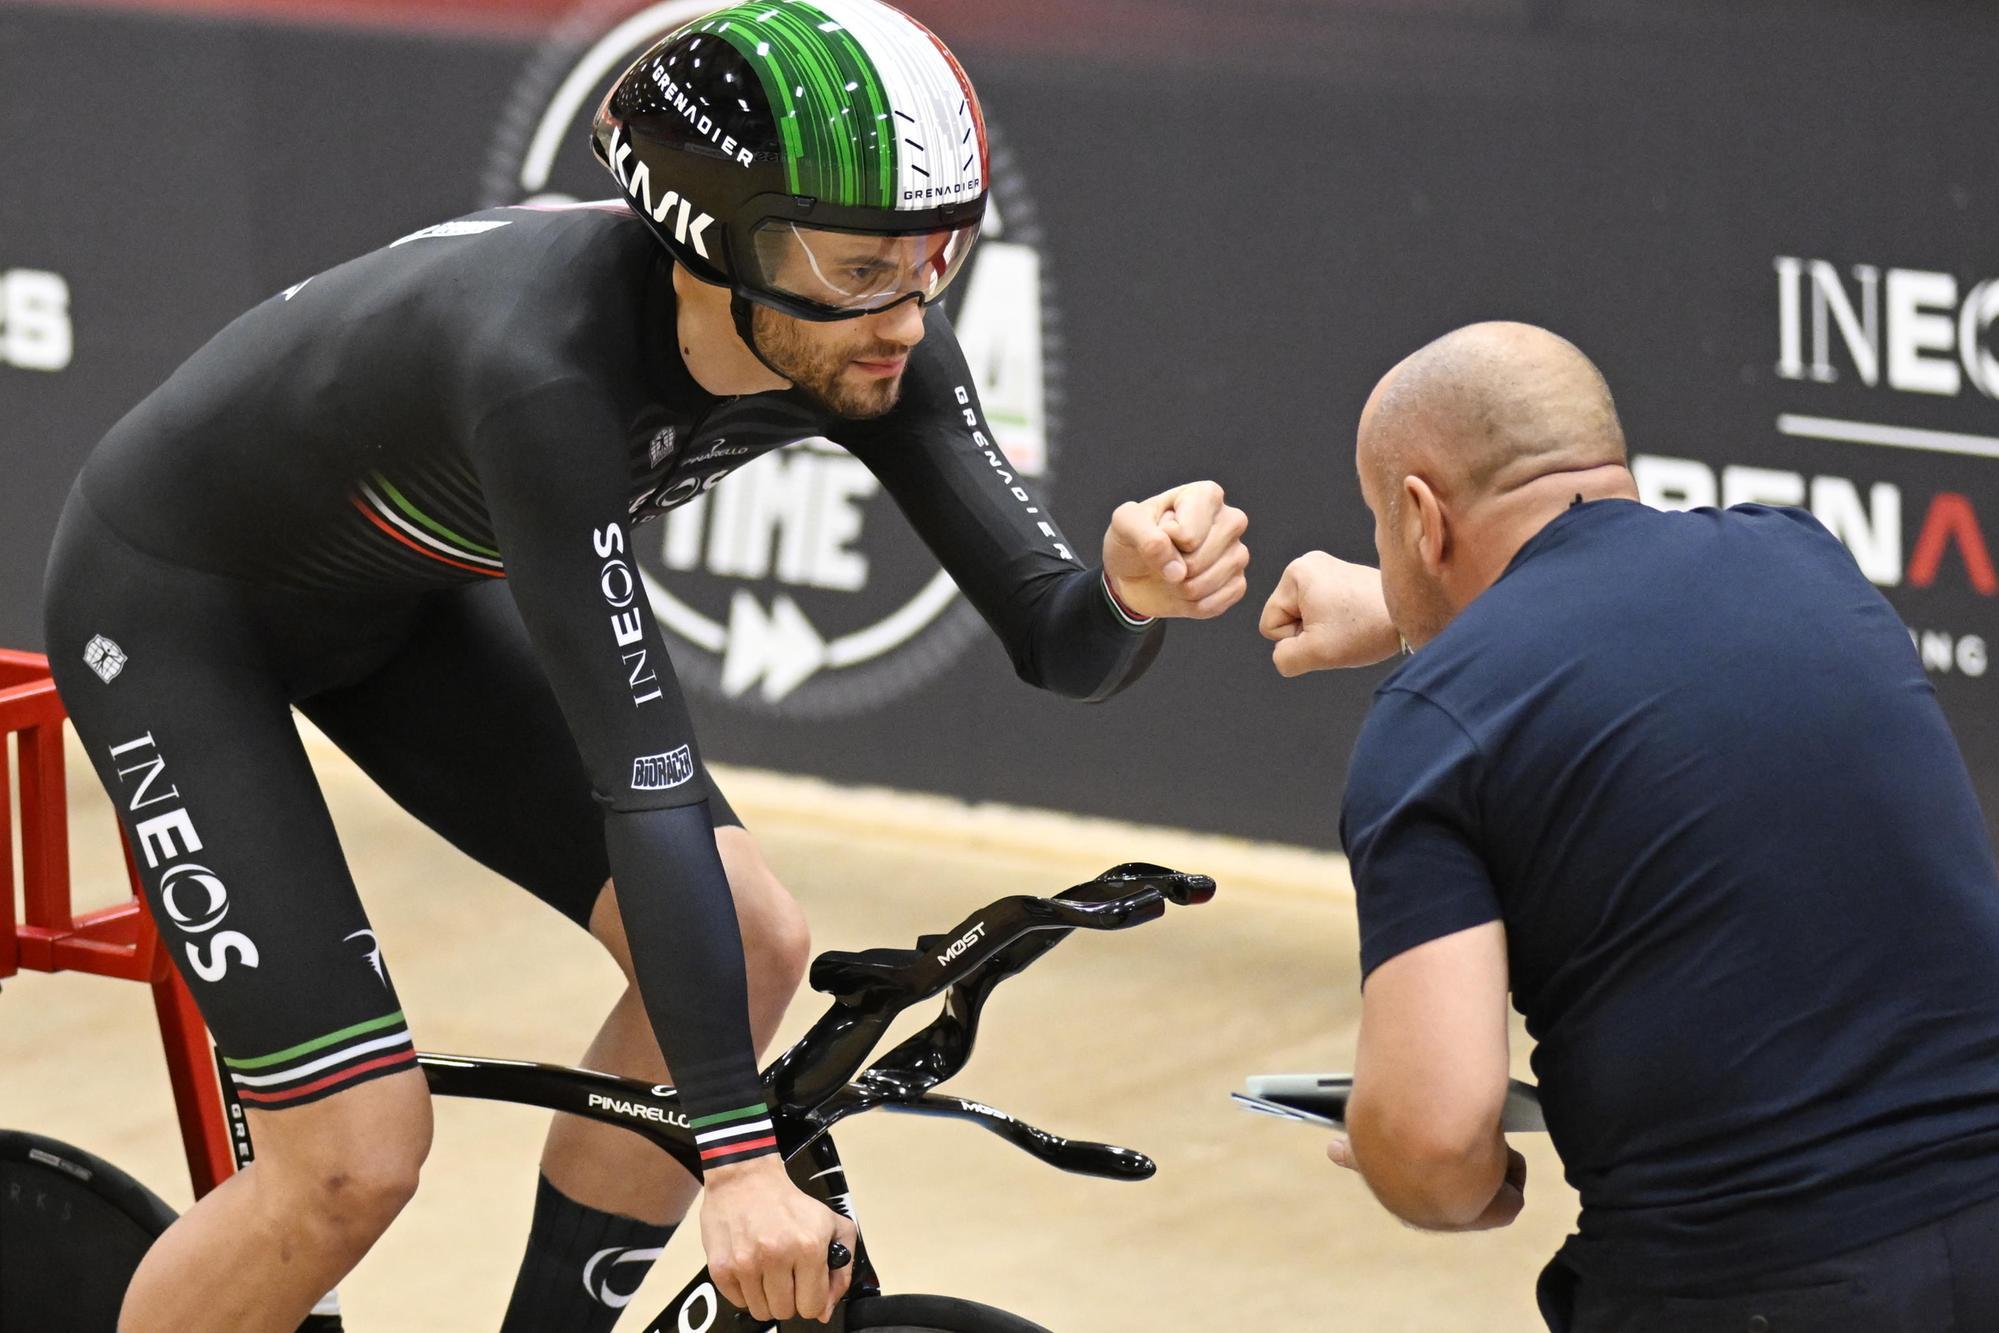 epa10231635 Italian cyclist Filippo Ganna (L) and his coach Marco Villa during his attempt to break the one hour cycling world record at the Velodrome Suisse in Grenchen, Switzerland, 08 October 2022. EPA/MARCEL BIERI